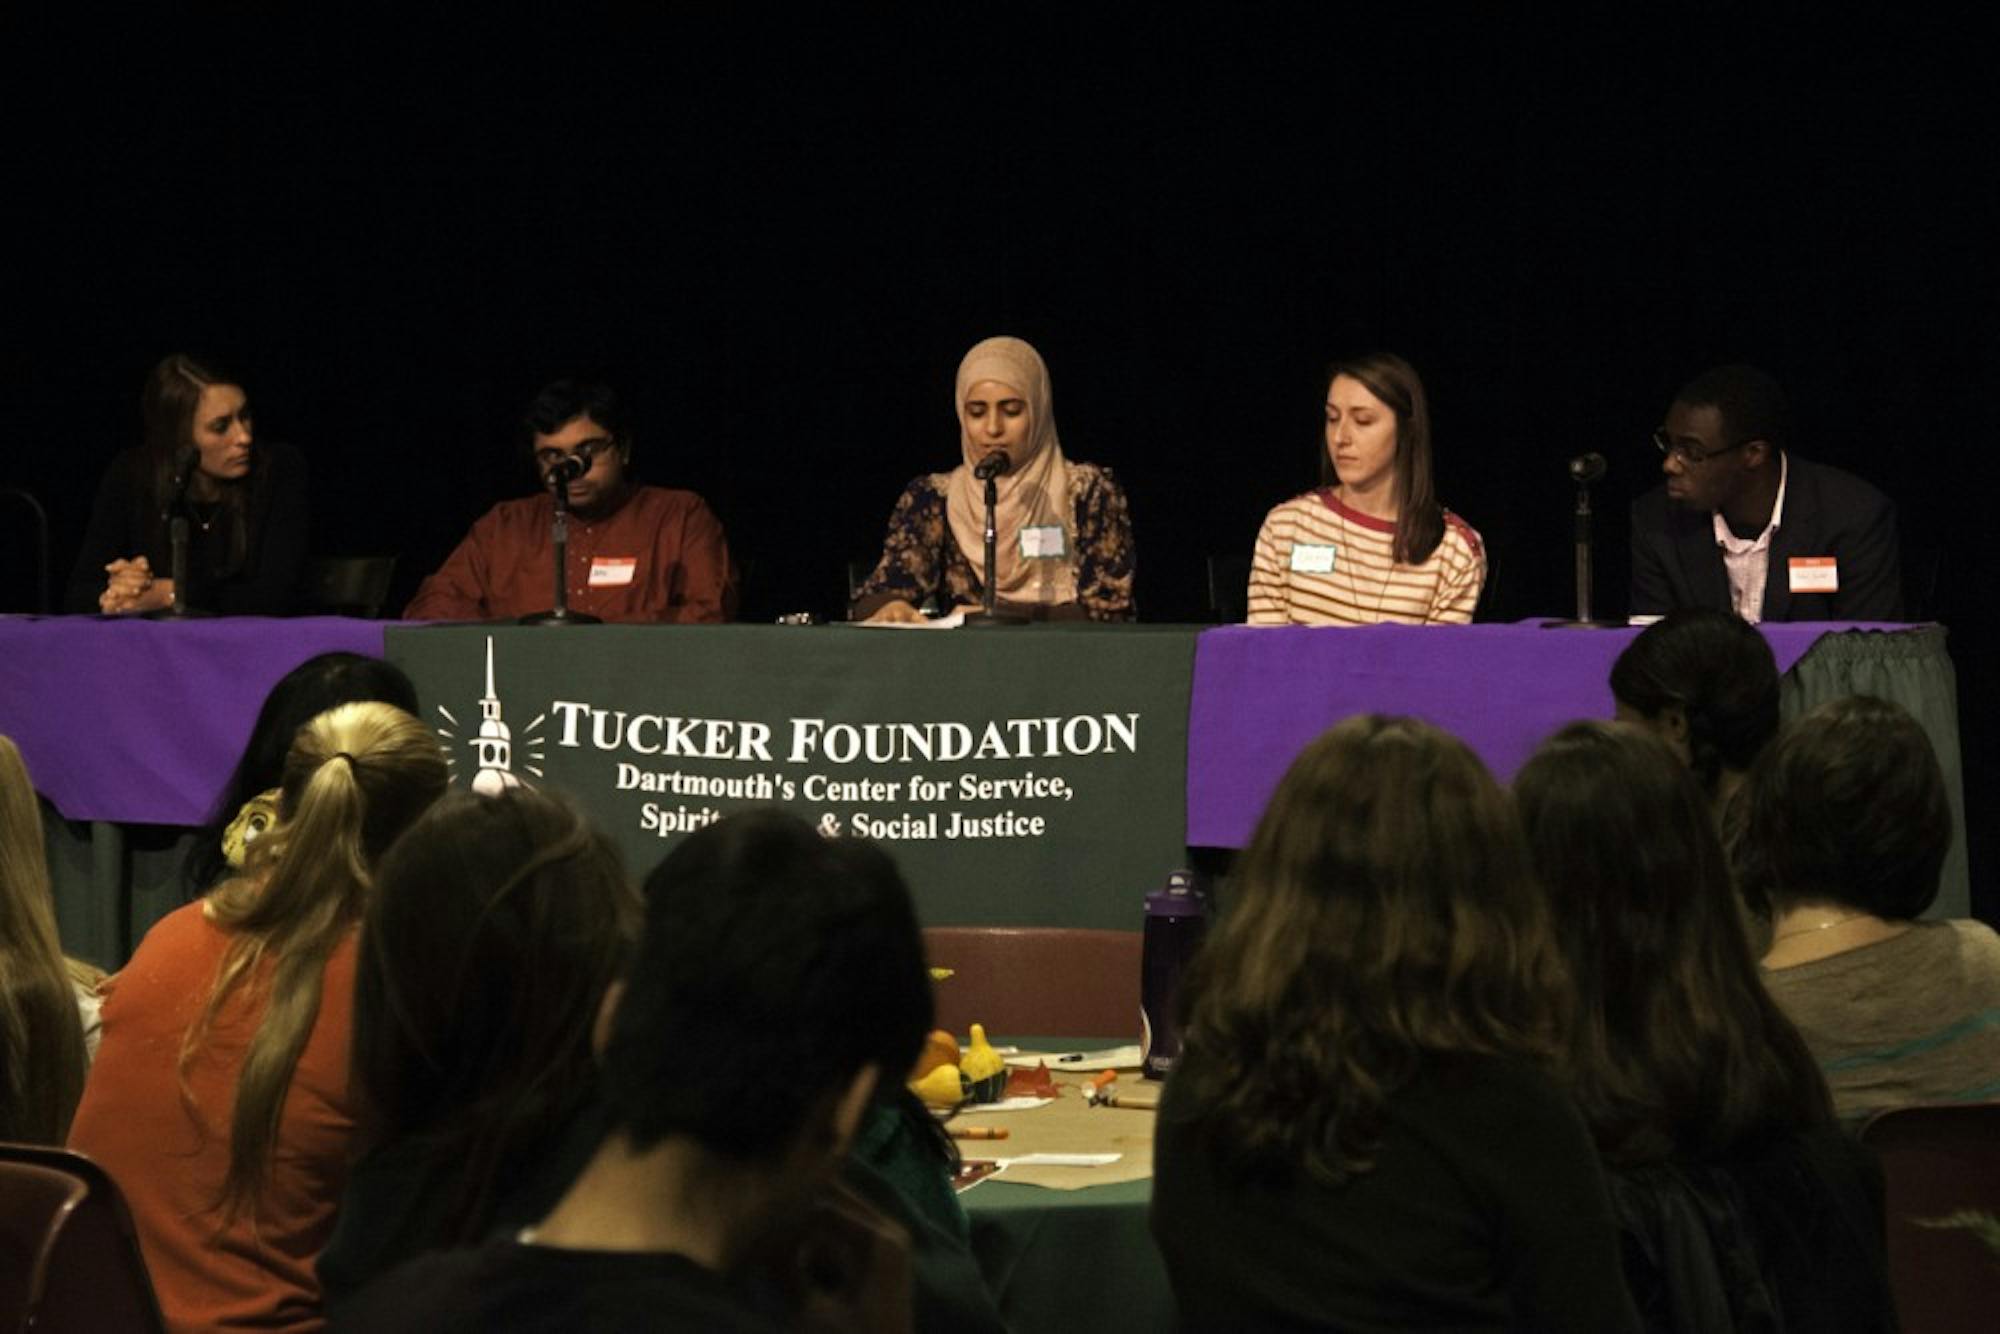 Five students discussed their experiences with faith on Tuesday night.